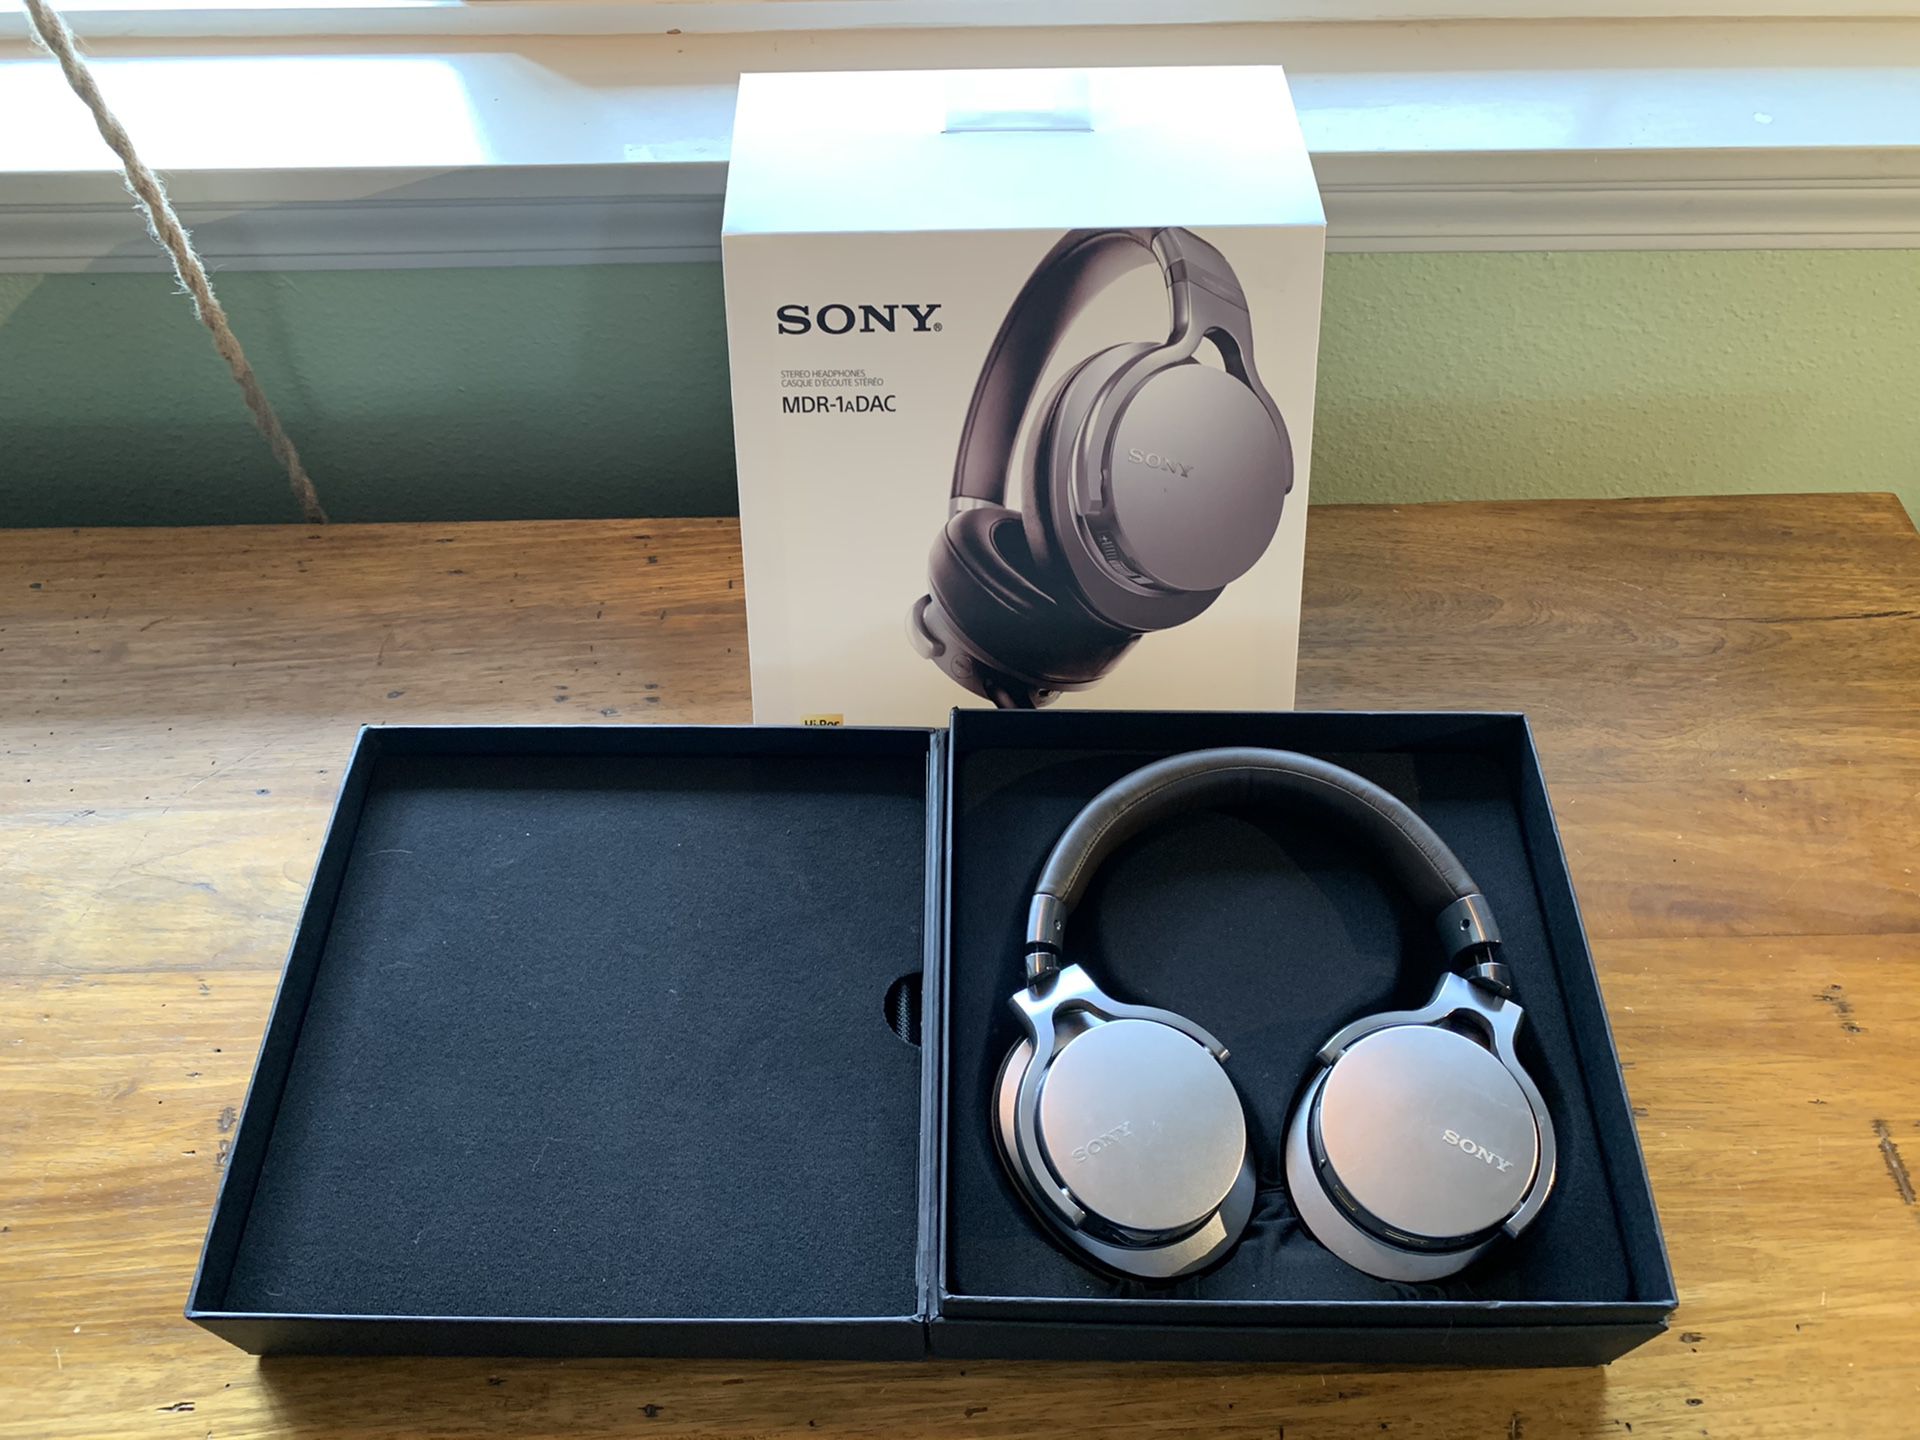 Sony MDR-1aDAC headphone with built in DAC